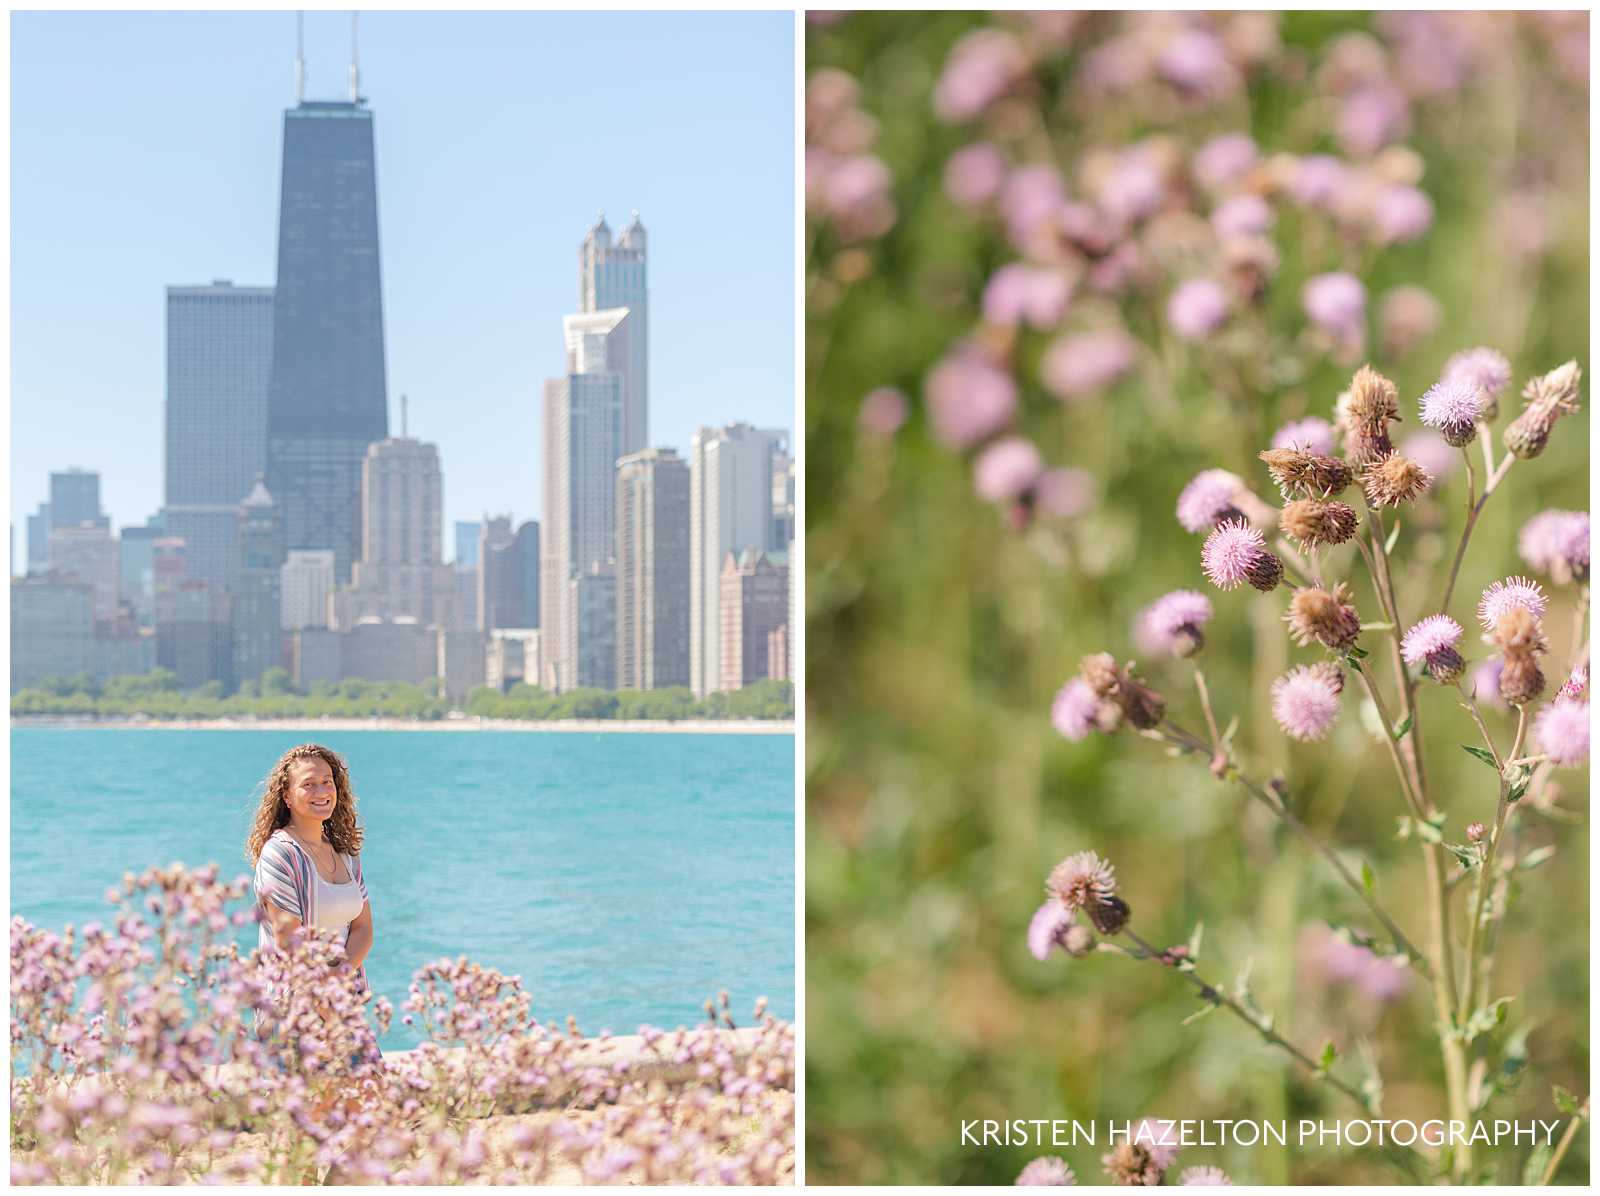 High school senior portraits at North Avenue Beach with Chicago city skyline and purple flowers